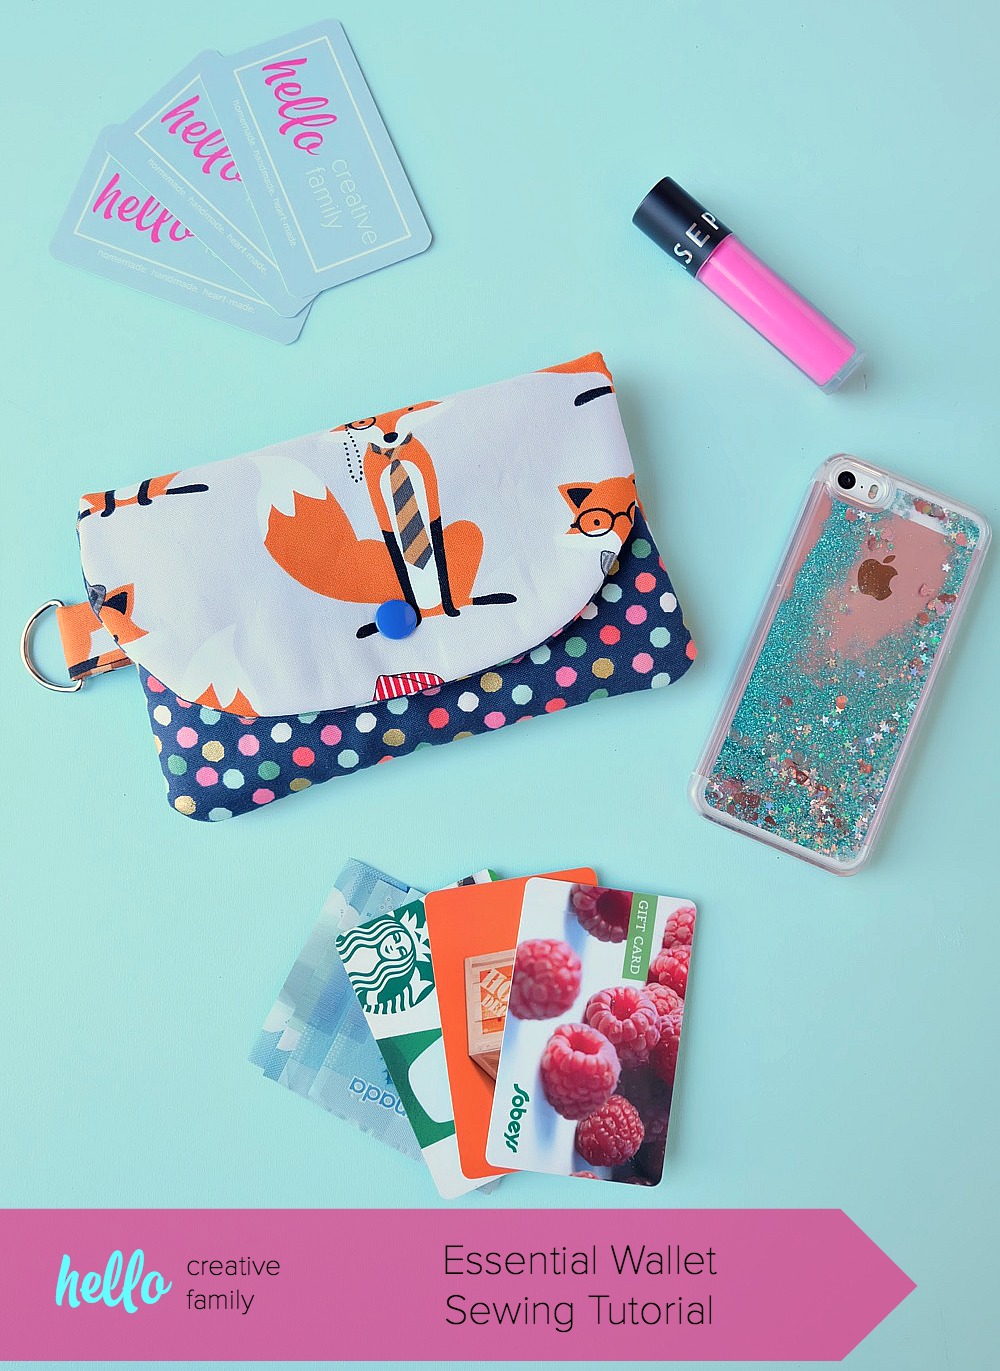 Looking for a cute little clutch to carry all your essentials? Check out this Essential Wallet Sewing Tutorial made using the Cricut Maker! This sweet little bag would make an adorable handmade gift! Perfect for teens and tweens. This project is #sponsored by Cricut. 